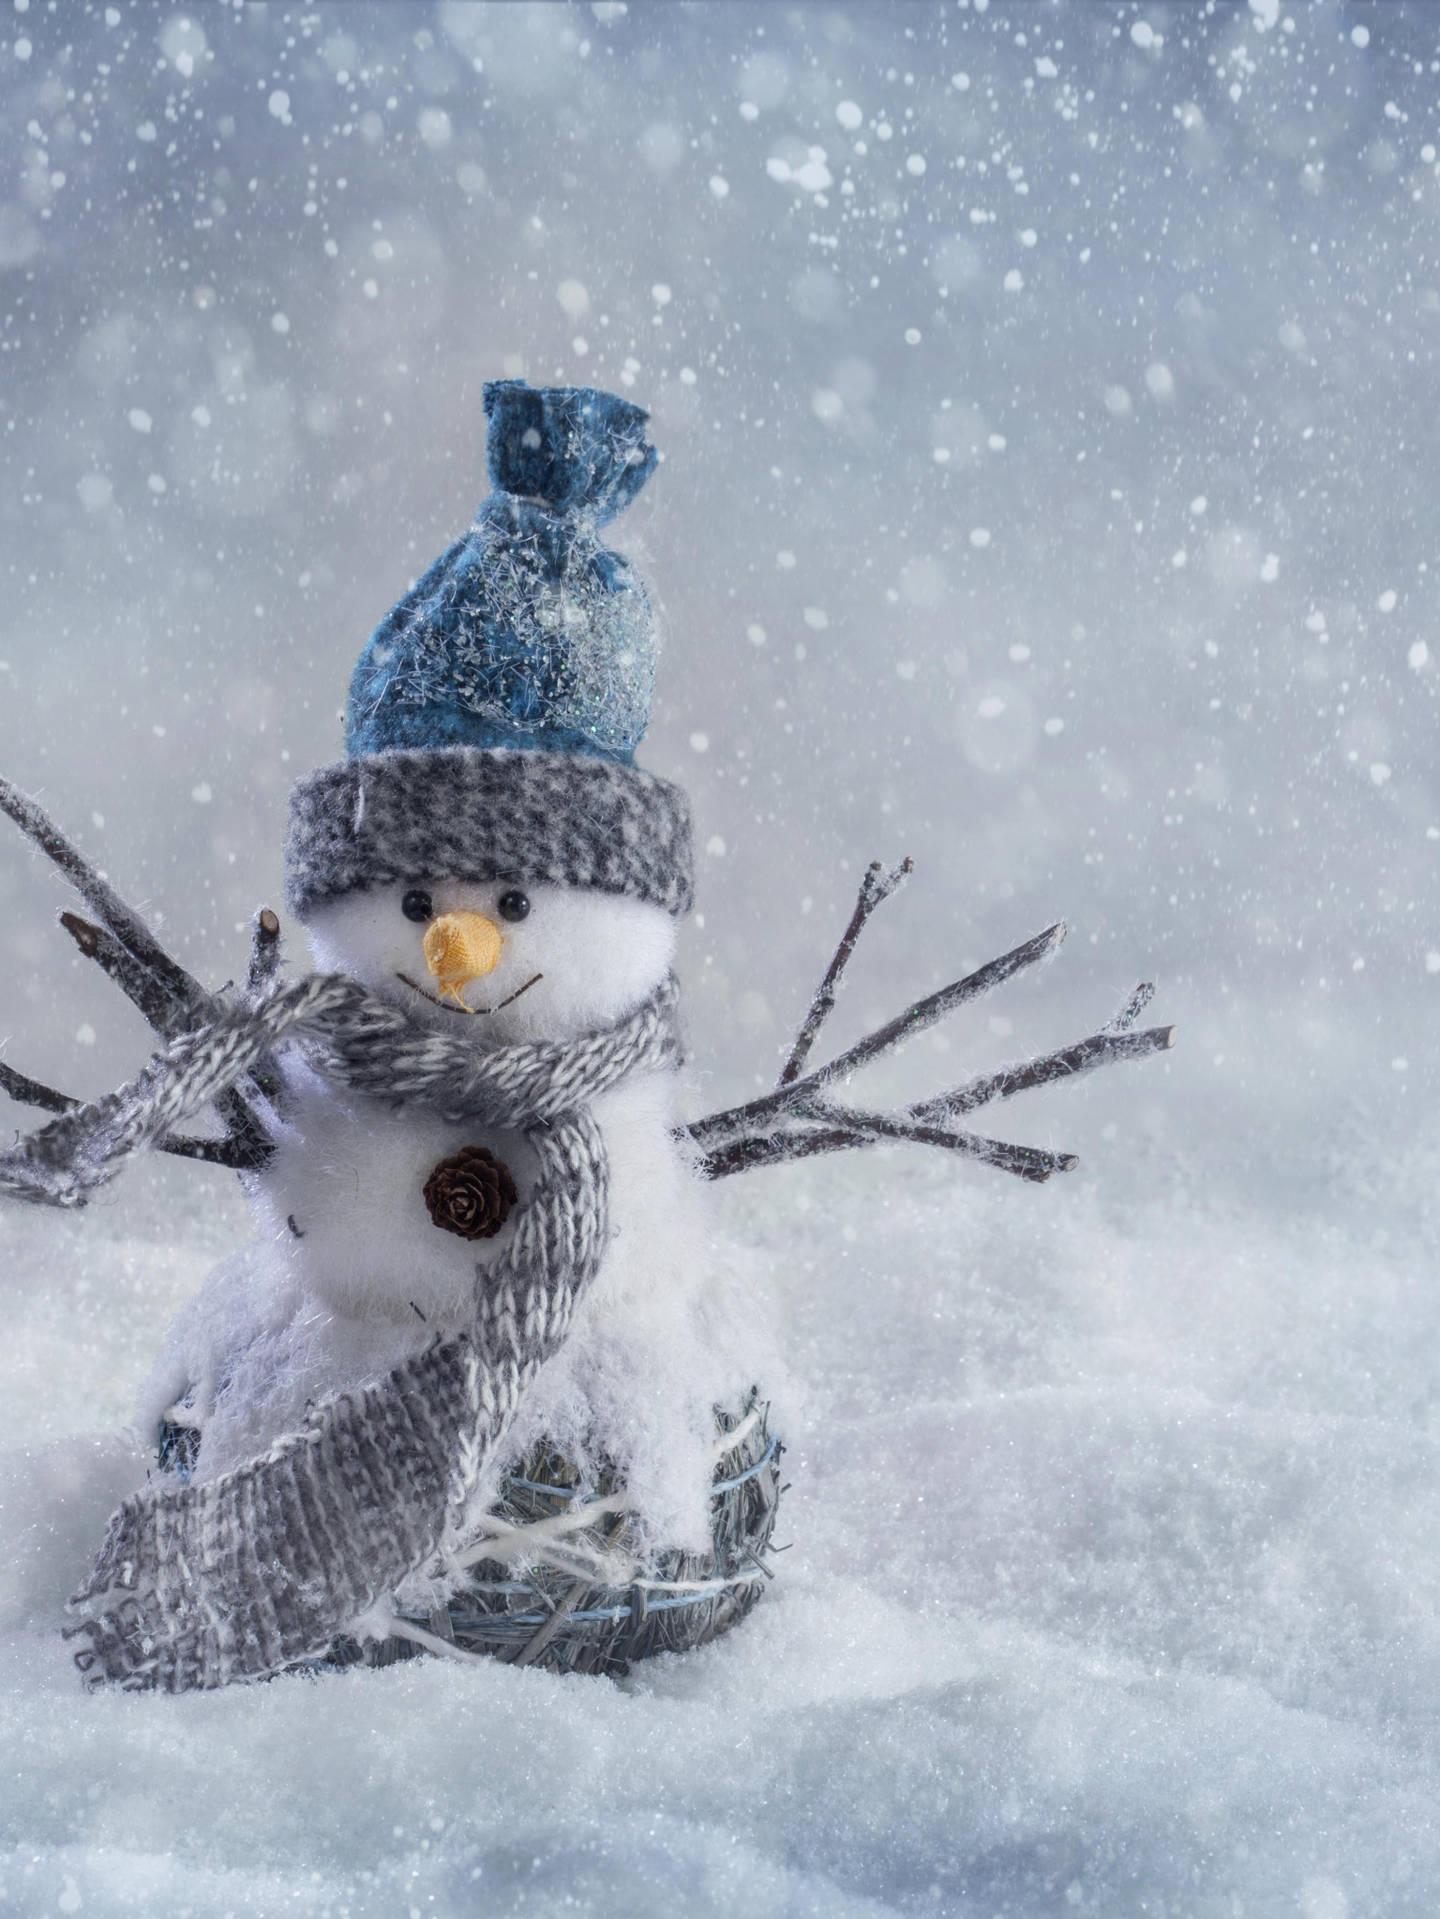 A Charming Winter Scene With Little Snowman On An